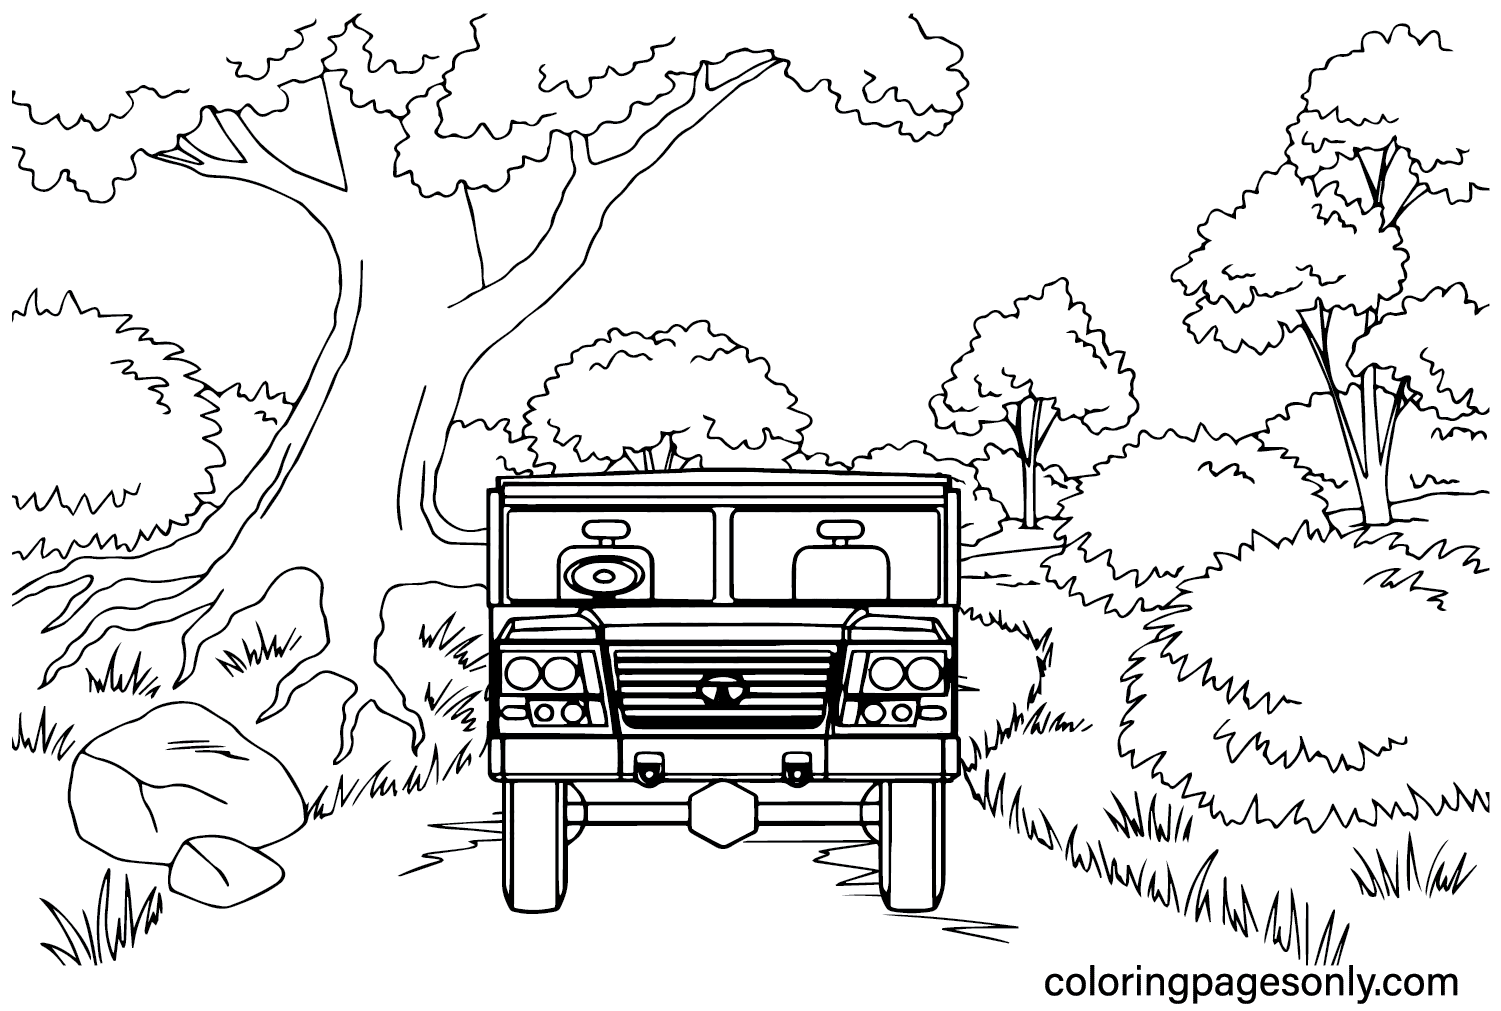 Tata LSV SUV 2010 Coloring Page from Tata